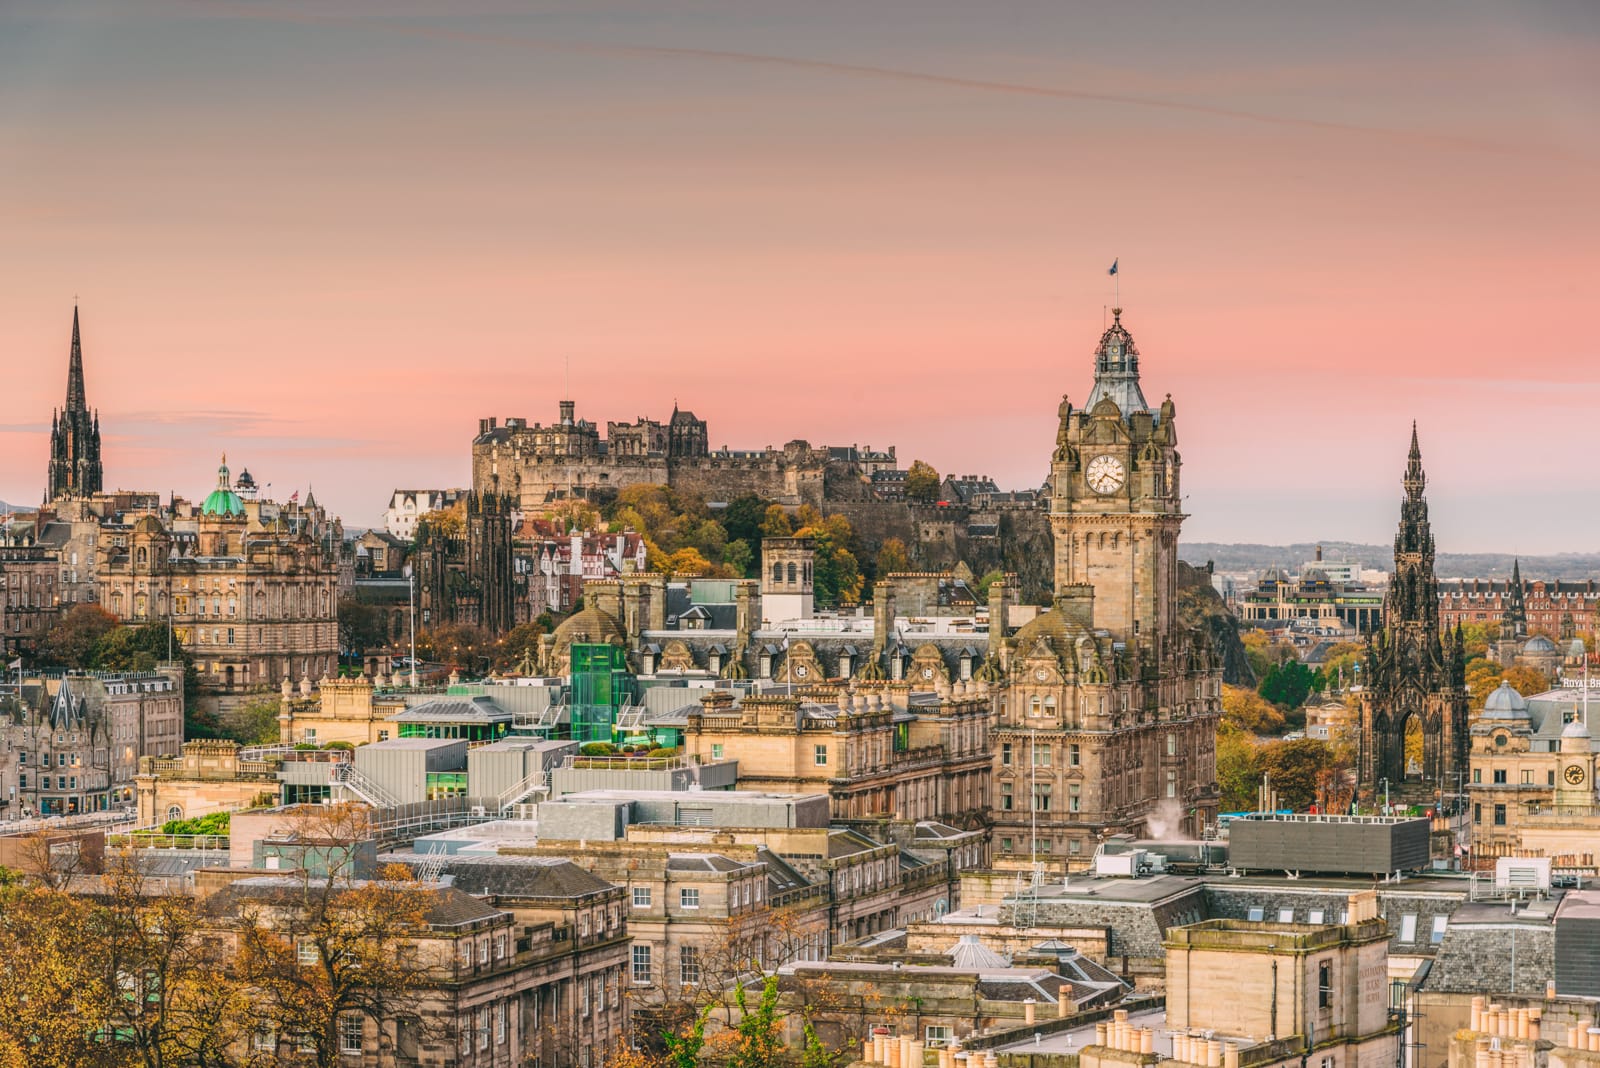 Top-Rated Attractions and Things to Do in Edinburgh